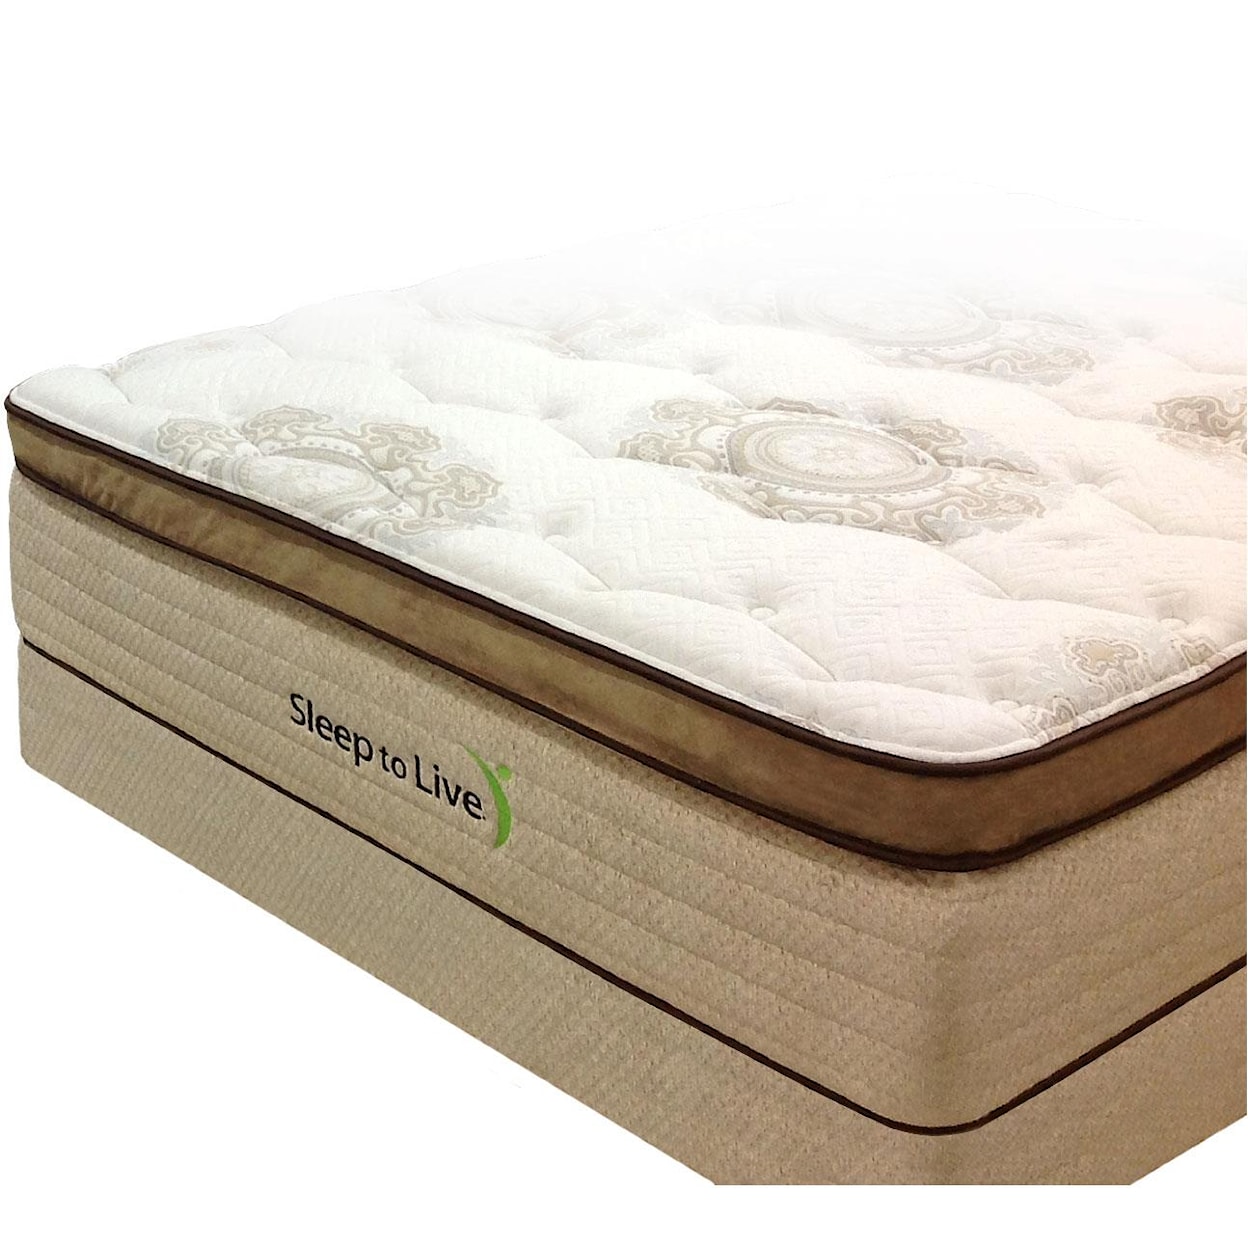 Kingsdown Body System 2 King Pocketed Coil Mattress